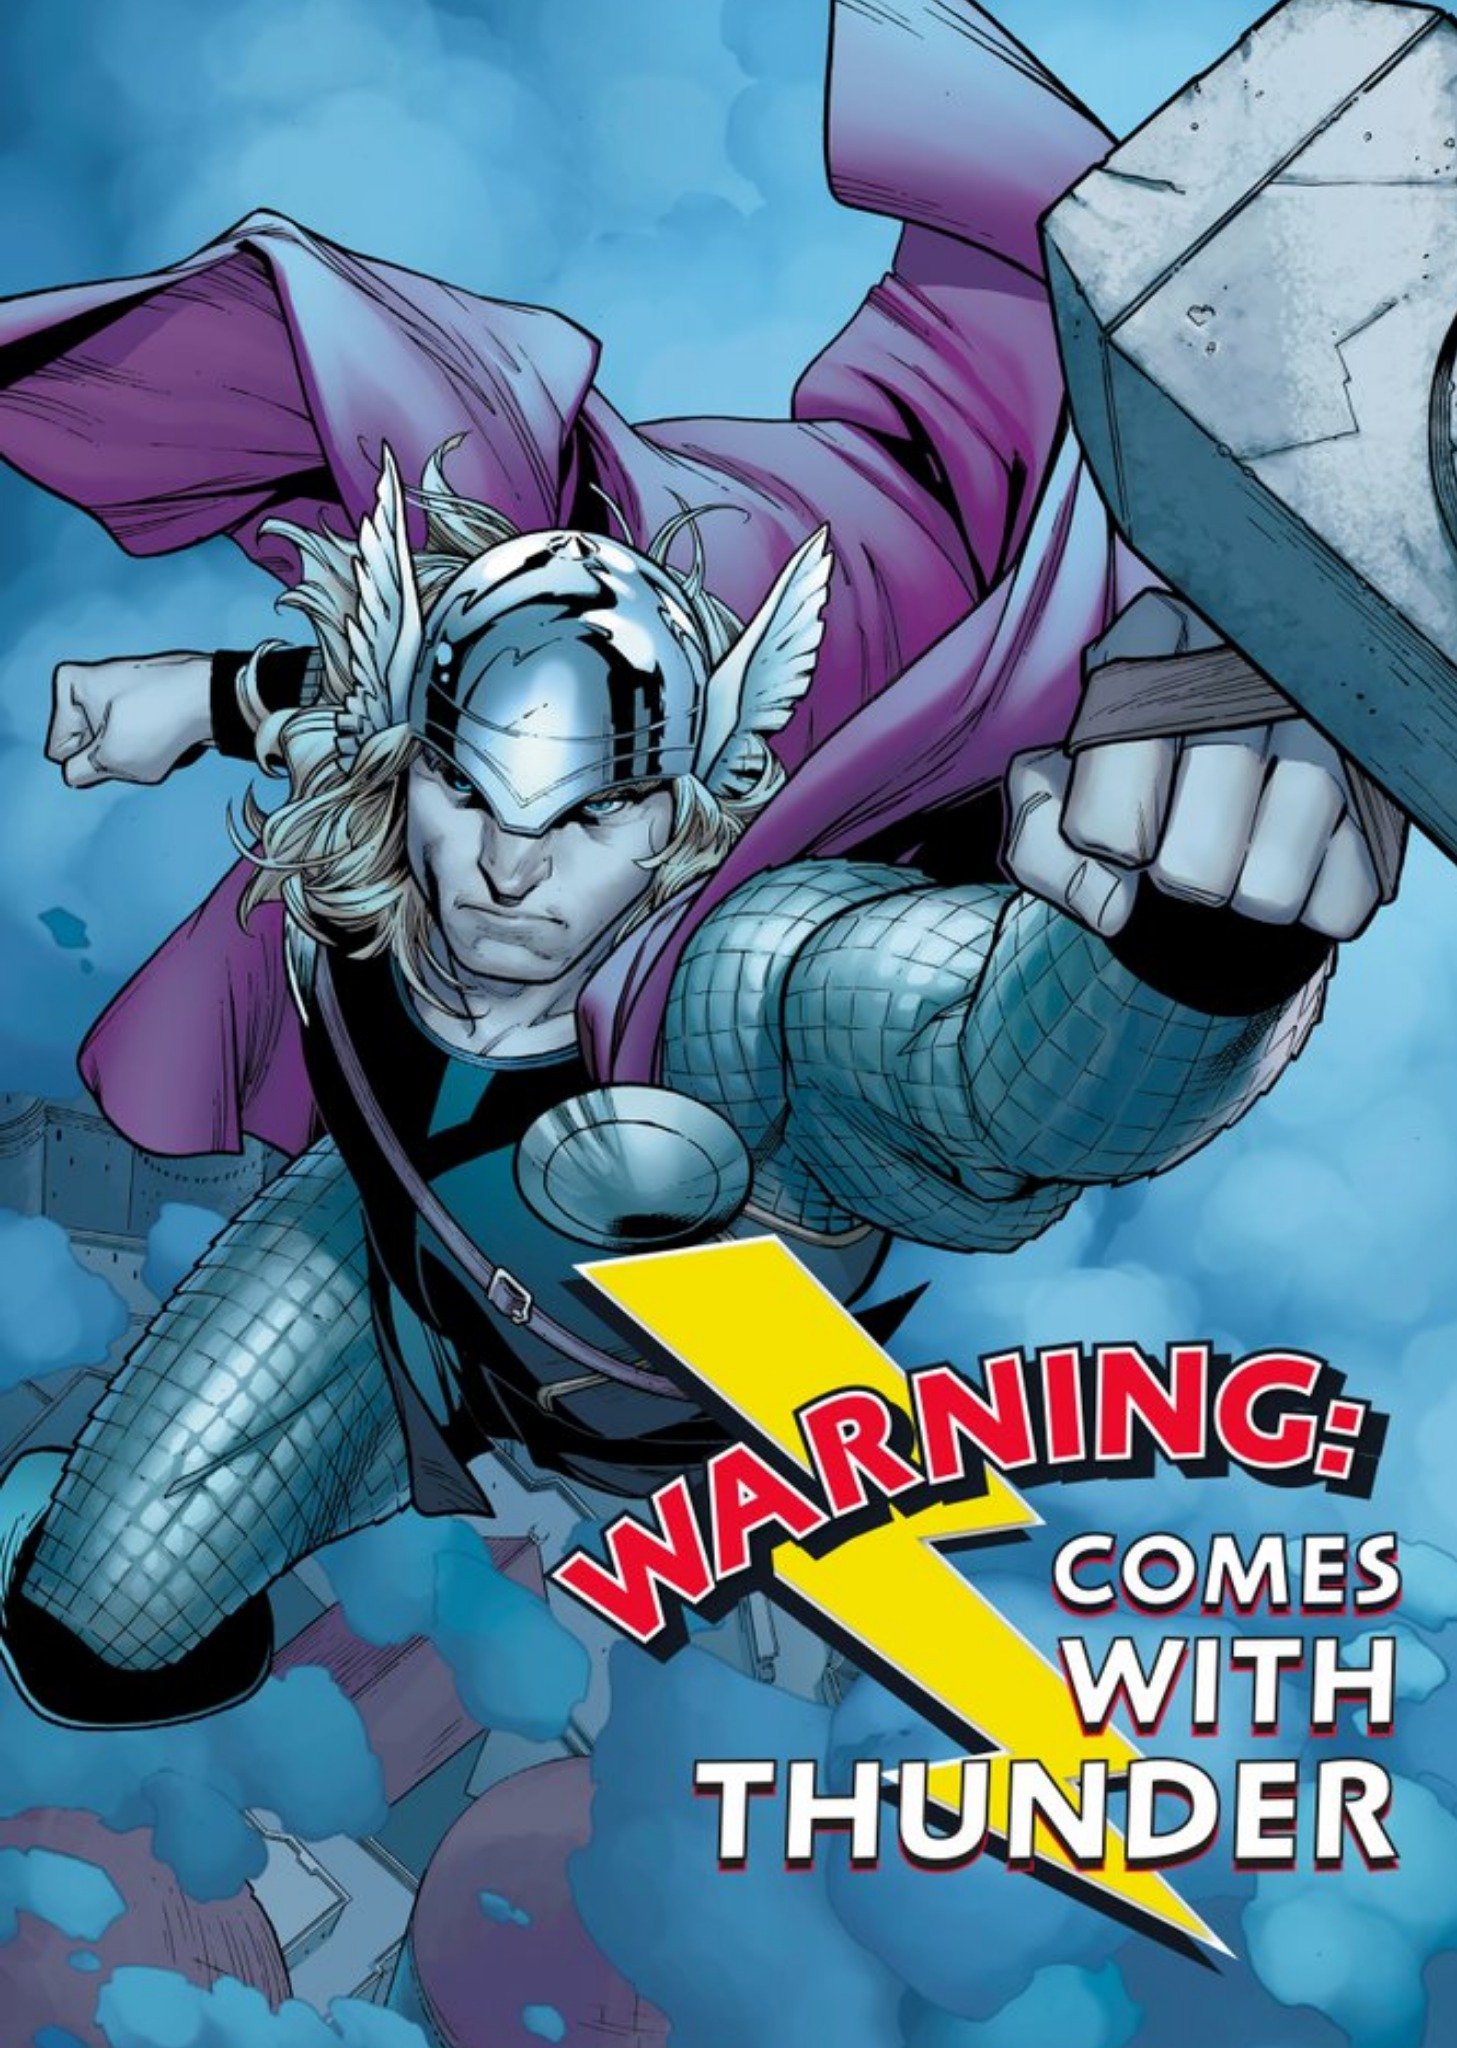 Marvel Avengers Birthday Card - Warning: Comes With Thunder - Thor Ecard